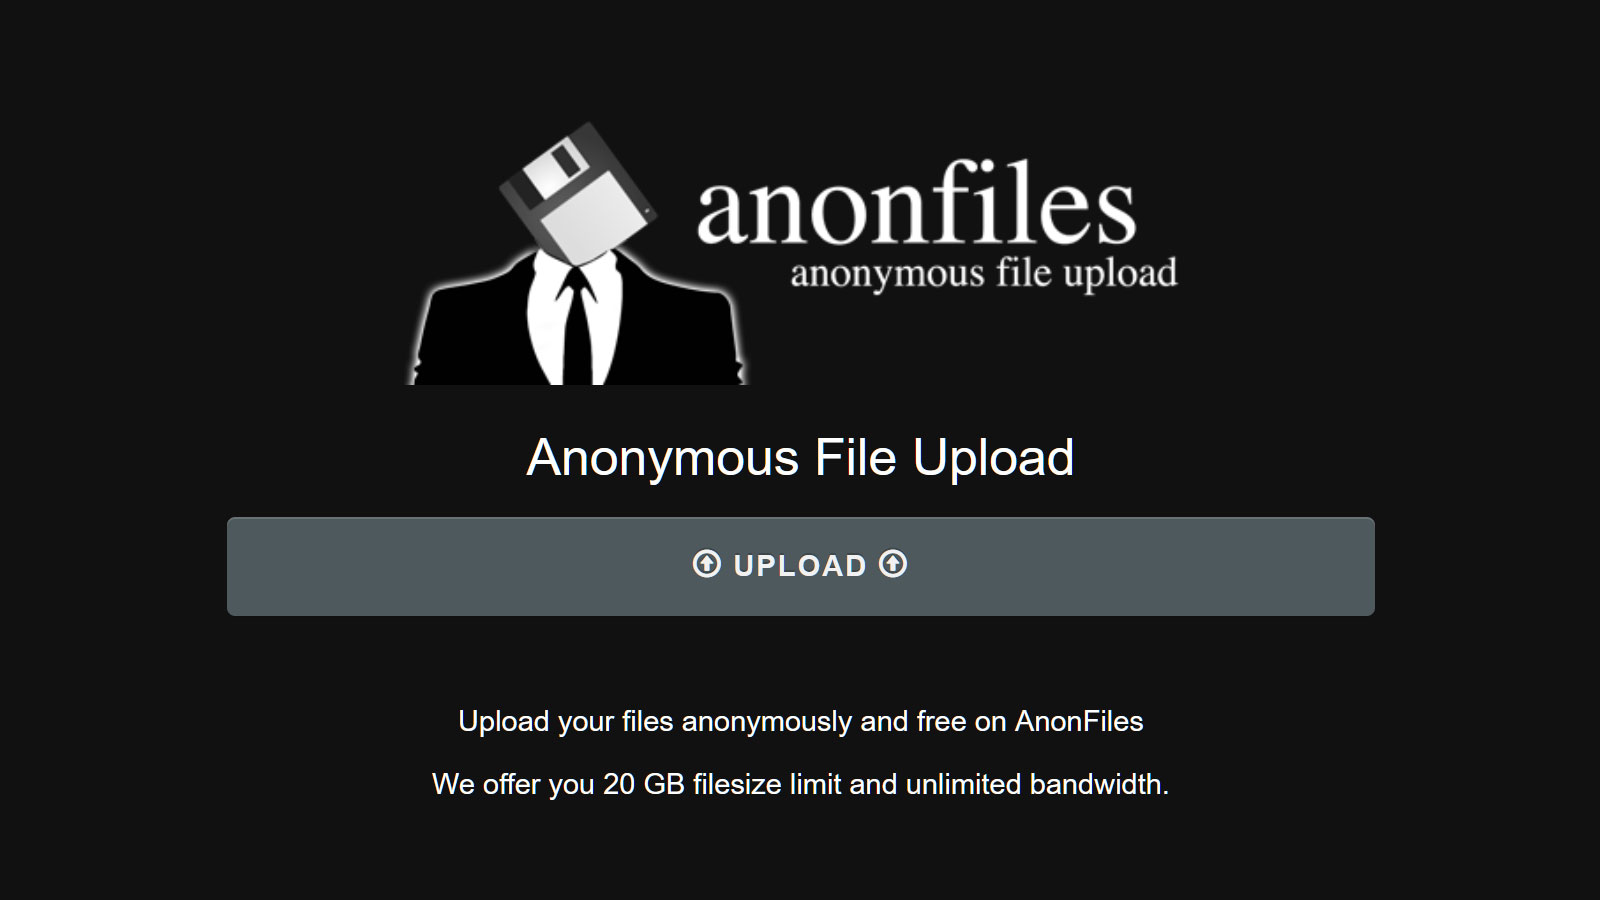 Search anonfiles